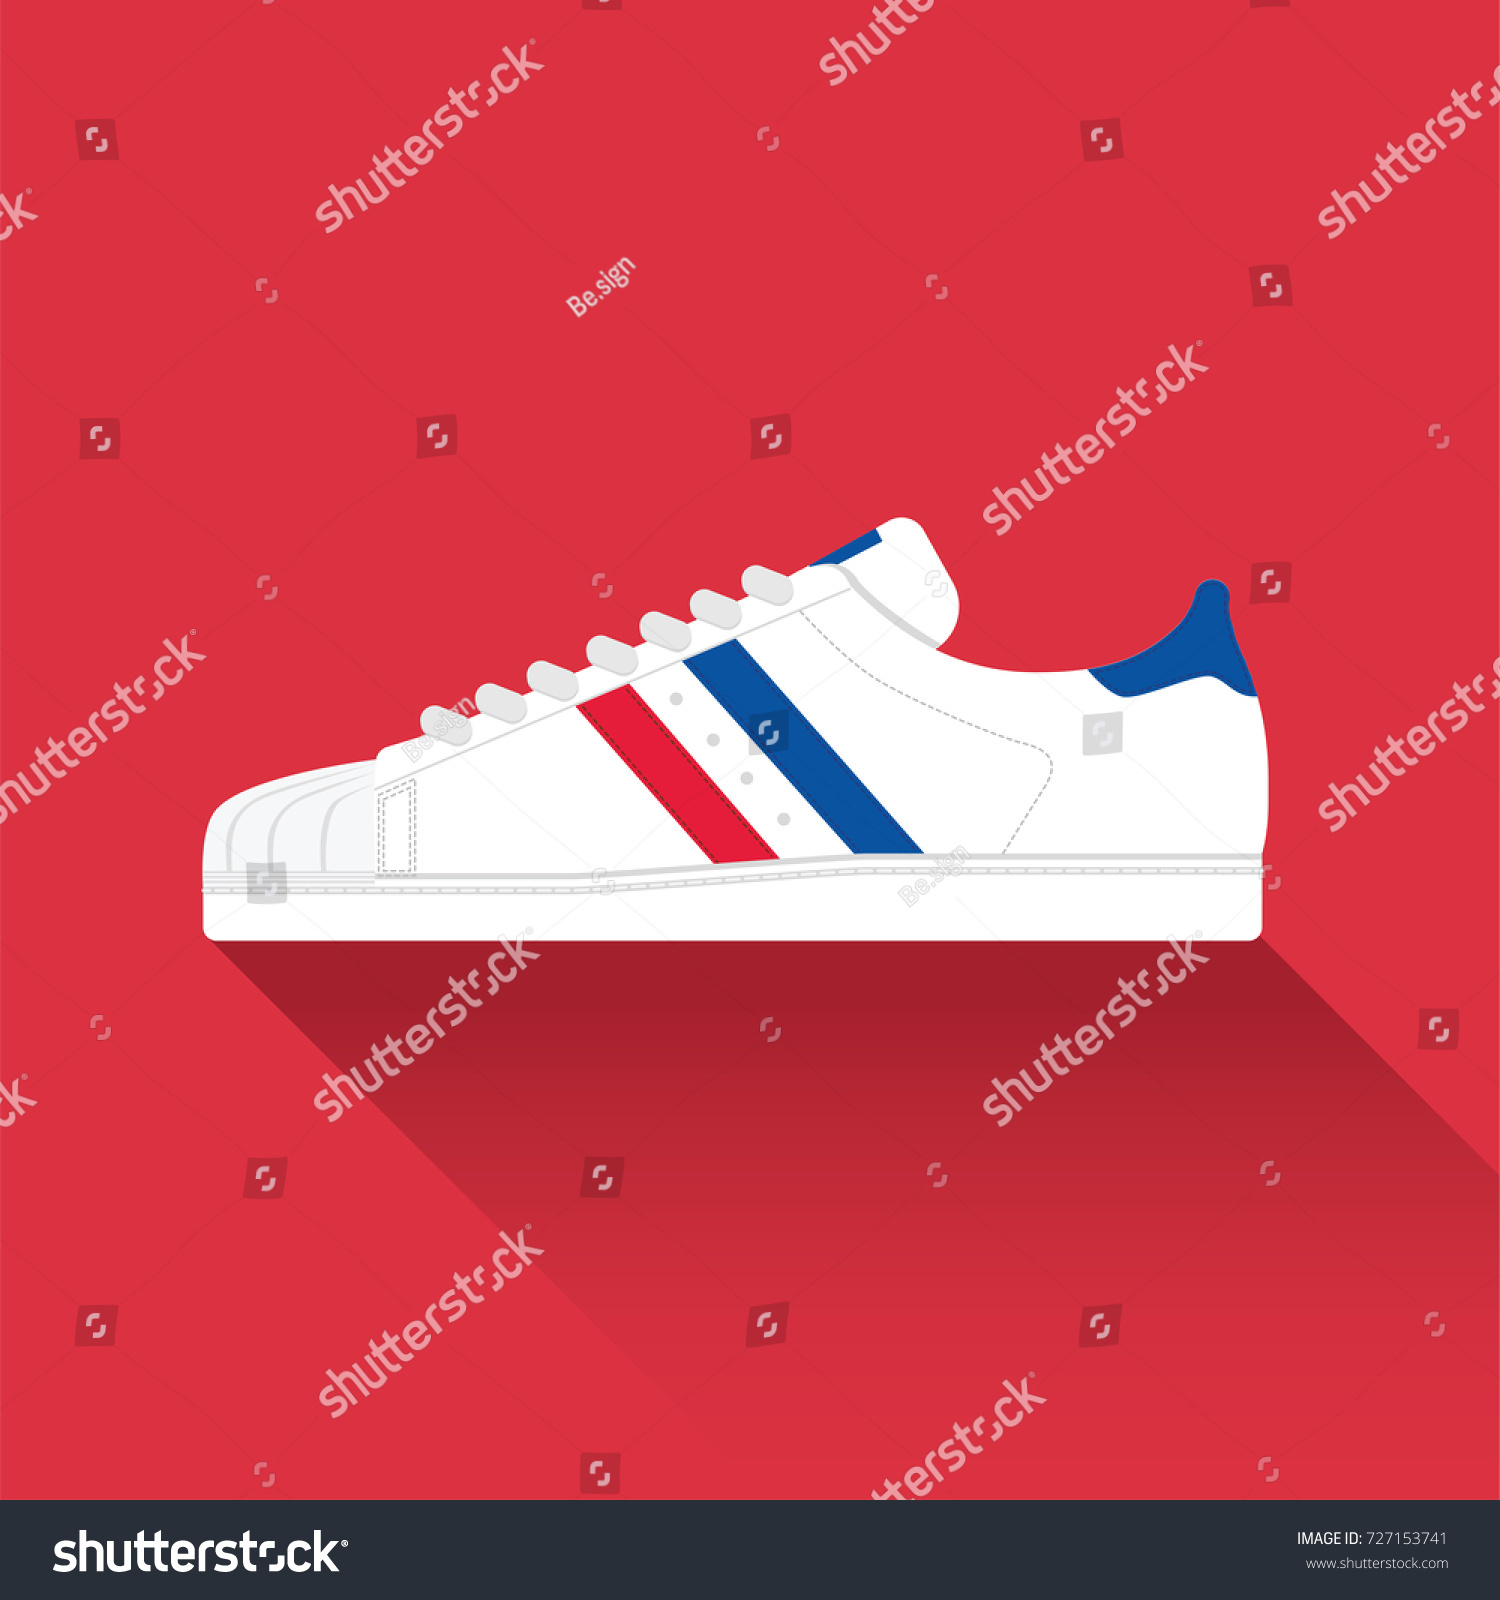 Adidas Superstar Old School Classic Sneaker Stock Vector (Royalty Free)  727153741